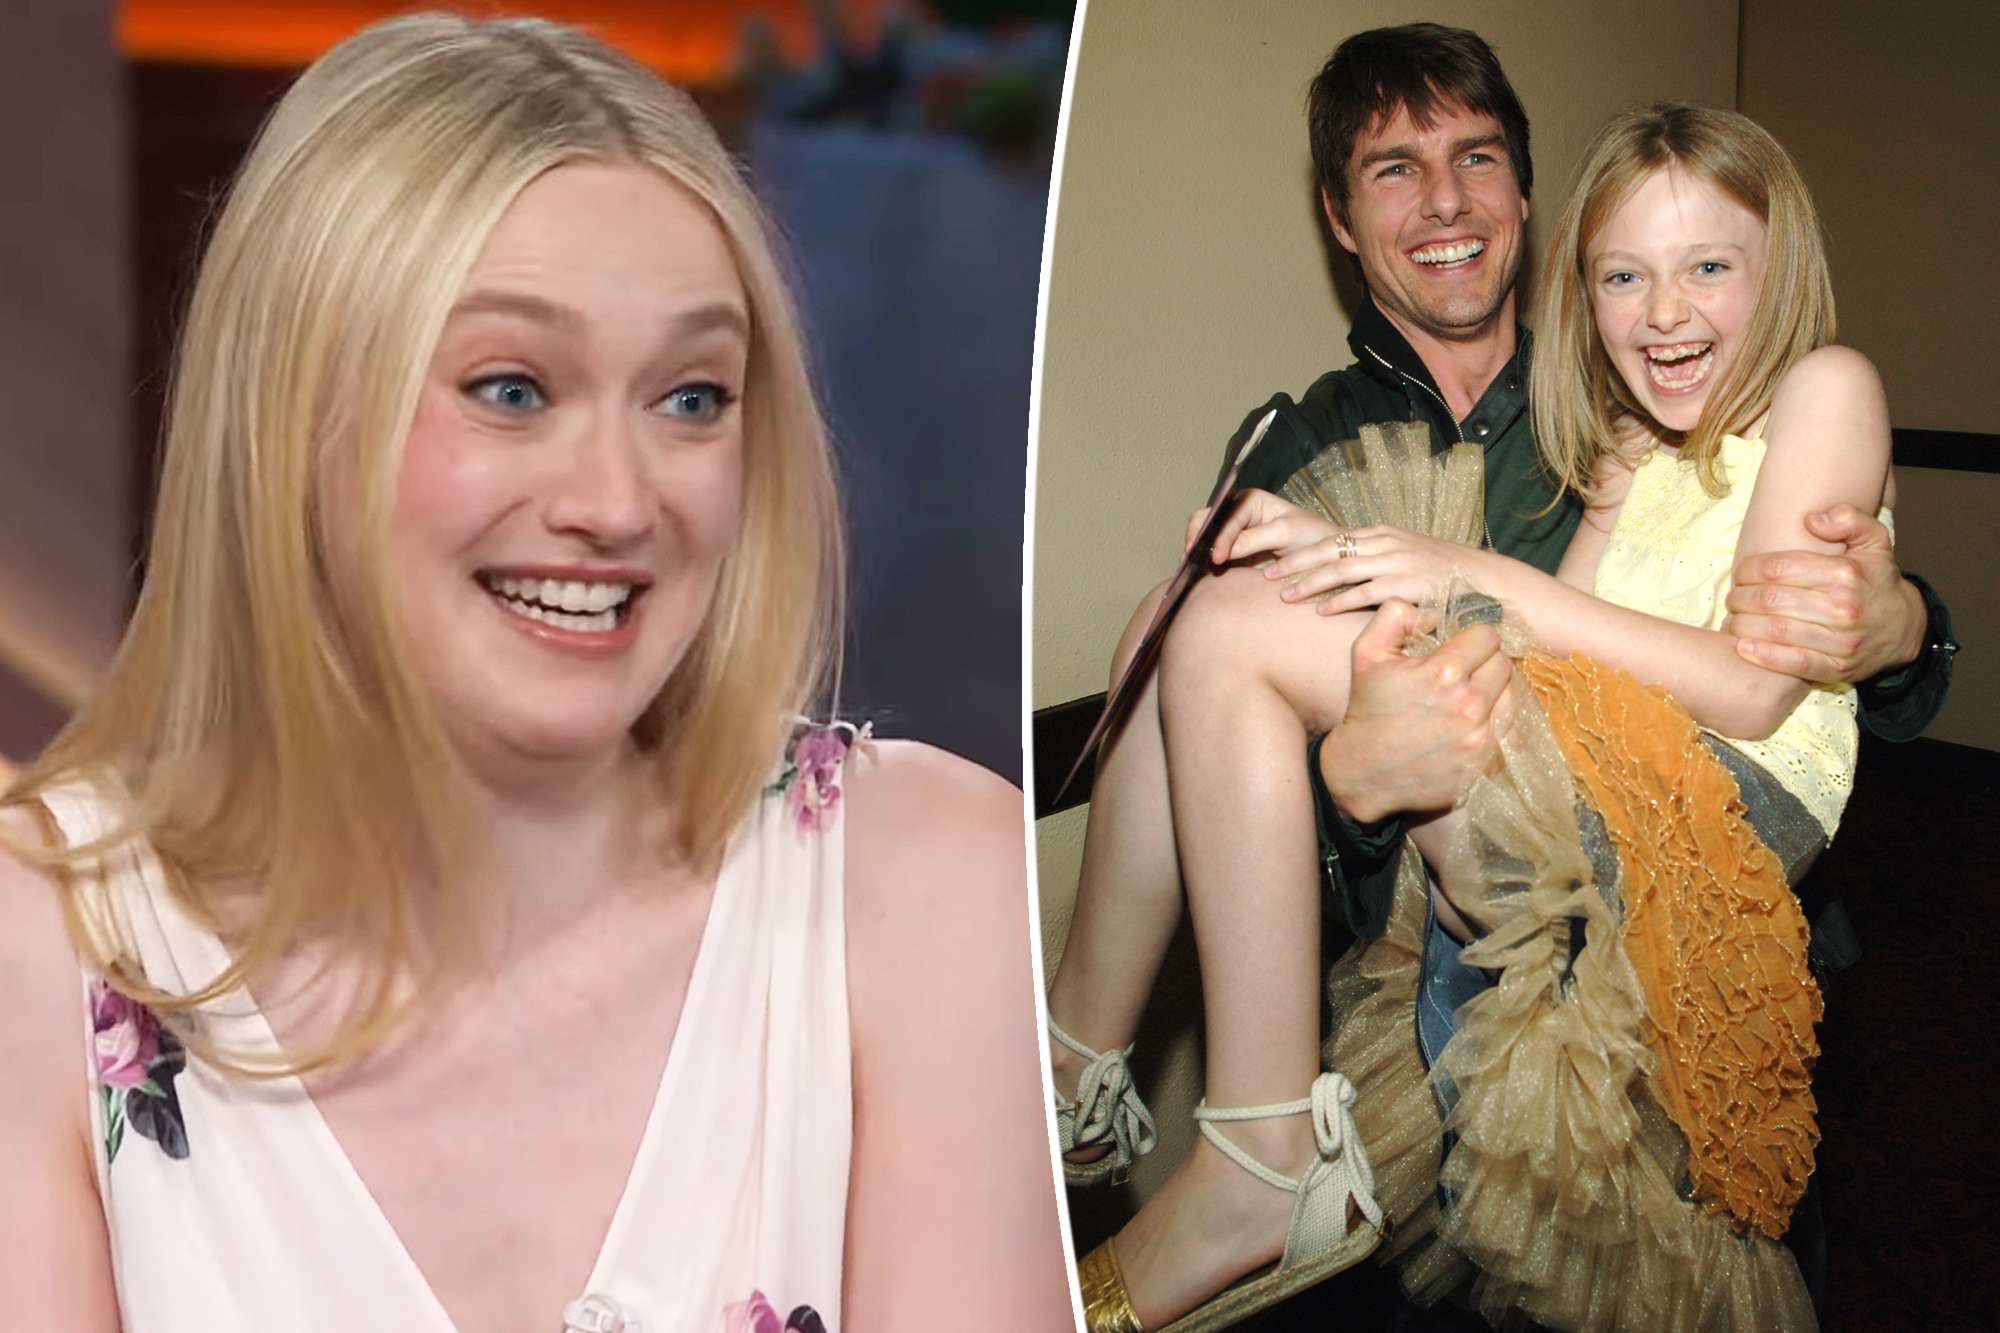 Dakota Fanning's Shoe Collection: A Gift from Tom Cruise